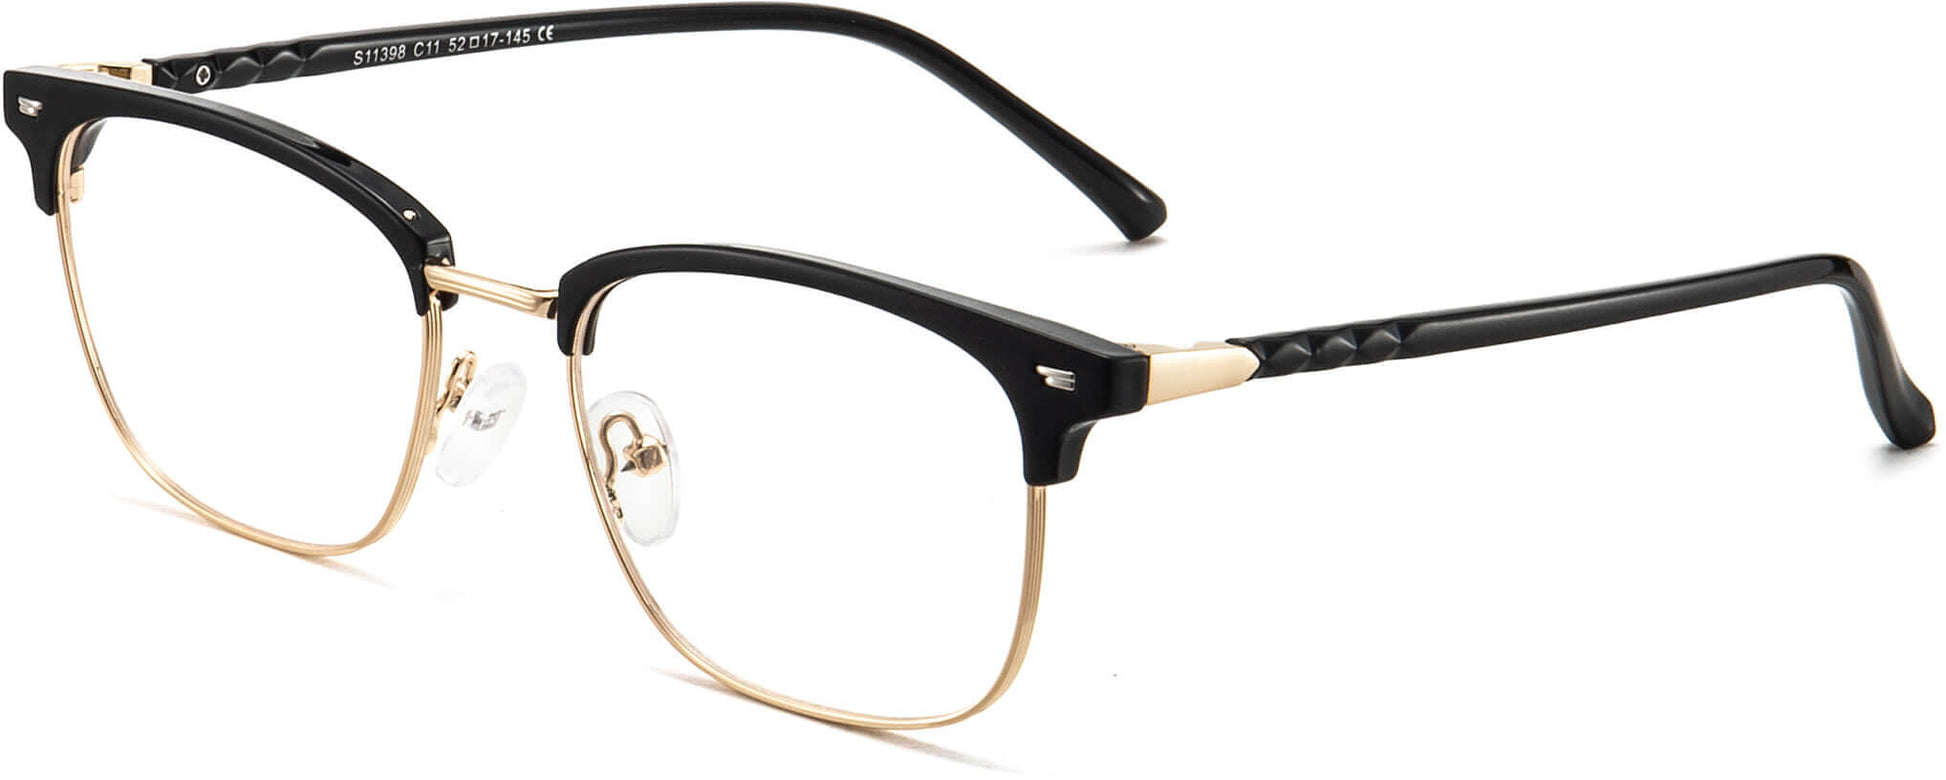 Gizeh Black Semi-rimless  Eyeglasses from ANRRI, Angle View